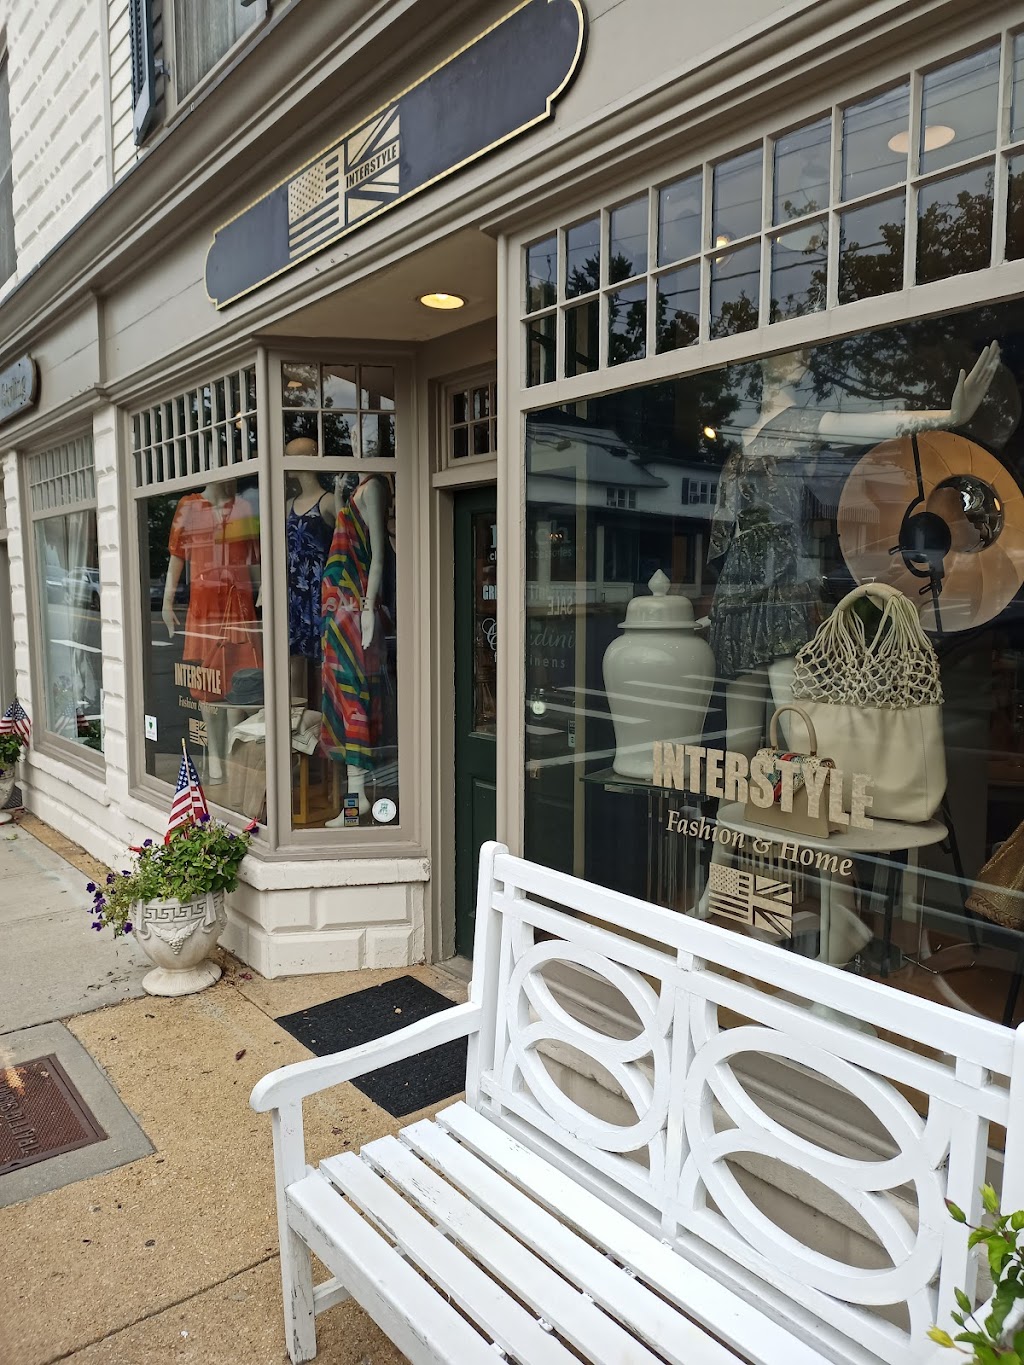 INTERSTYLE Fashion & Home | 28 Birch Hill Rd, Locust Valley, NY 11560 | Phone: (516) 801-6688